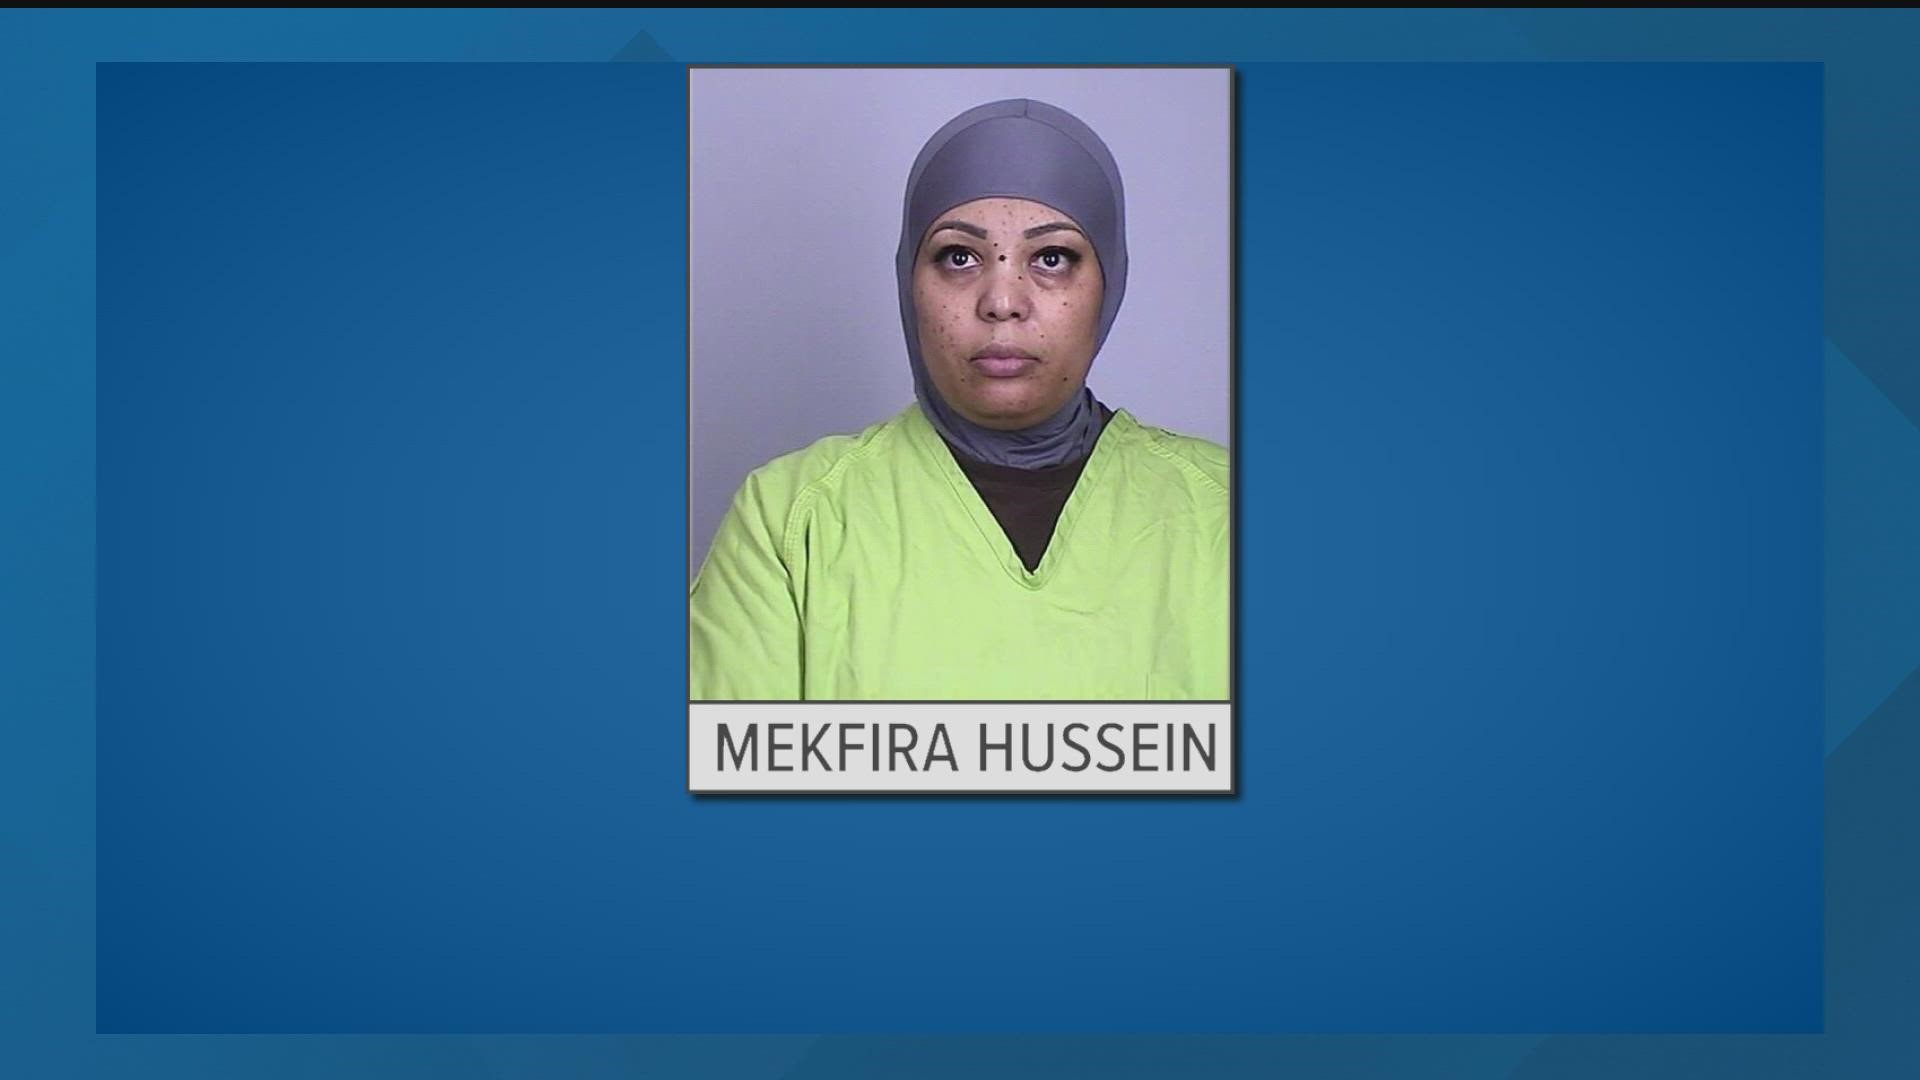 Mekfira Hussein was arrested after allegedly booking a one-way flight to Ethiopia. Three other suspects are already out of the United States.